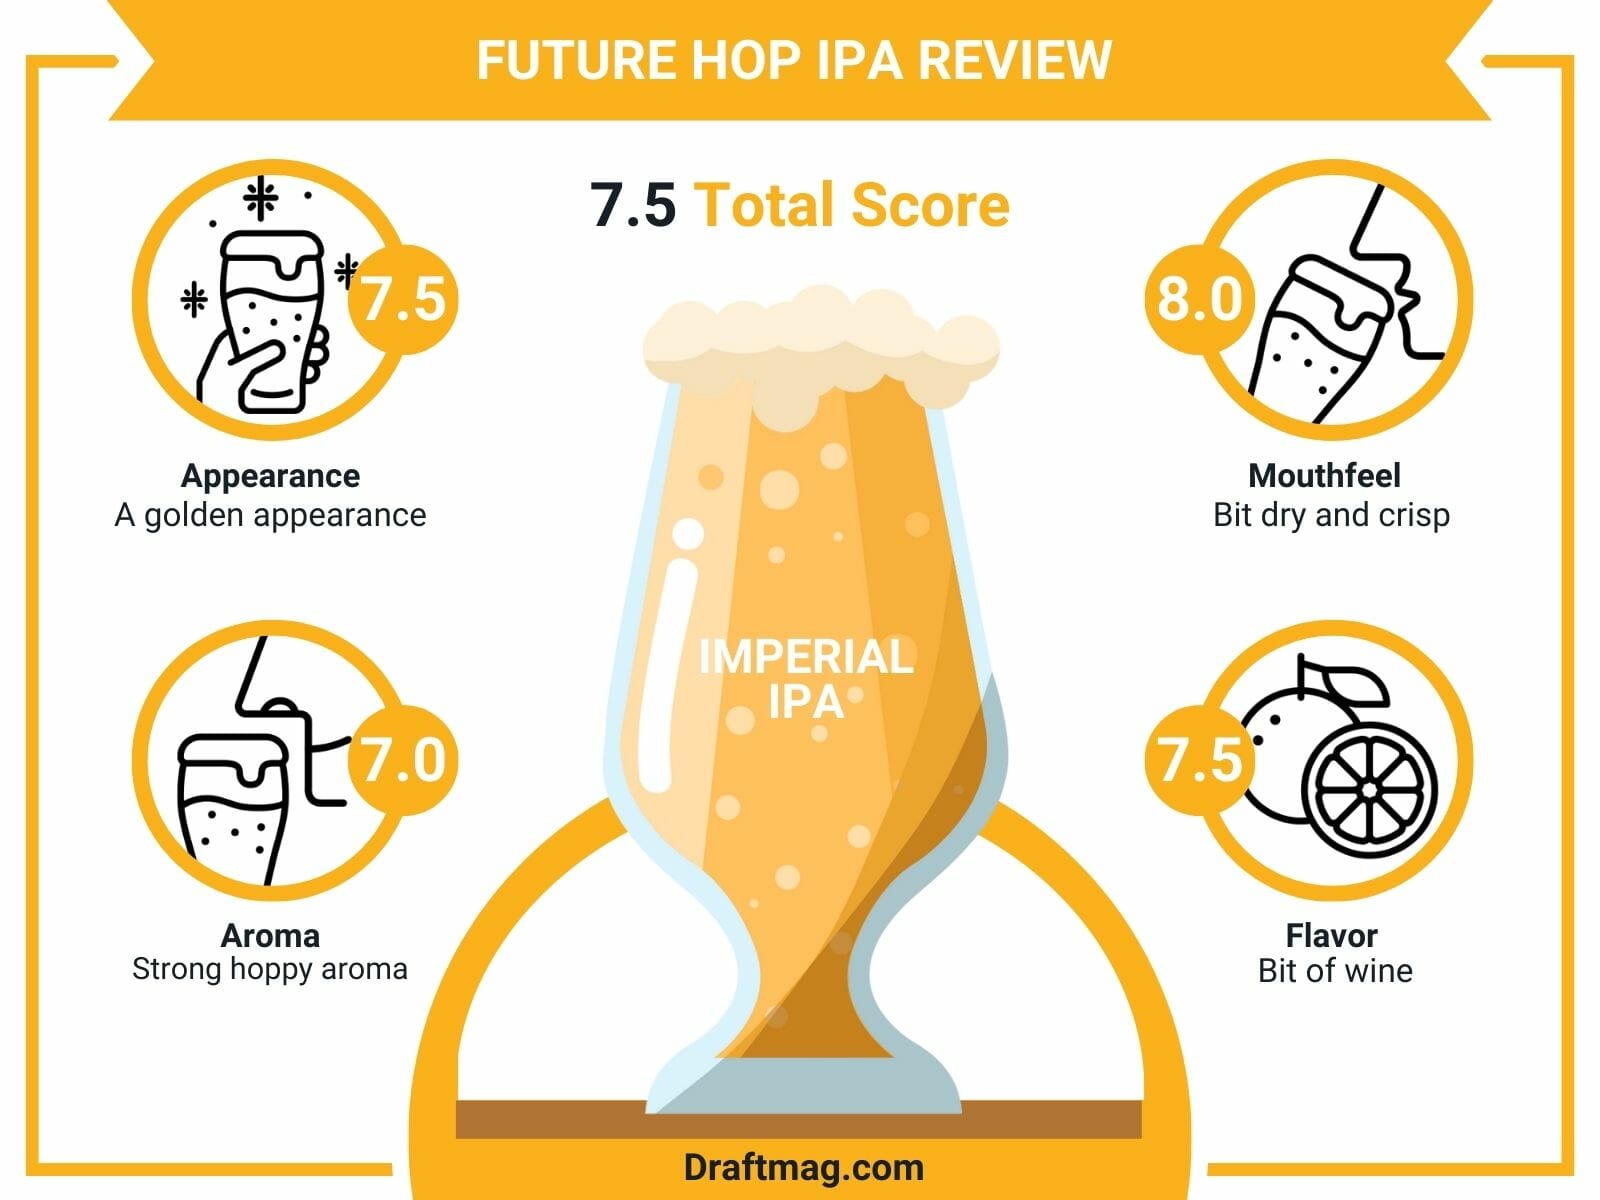 Future Hop IPA Review Infographic